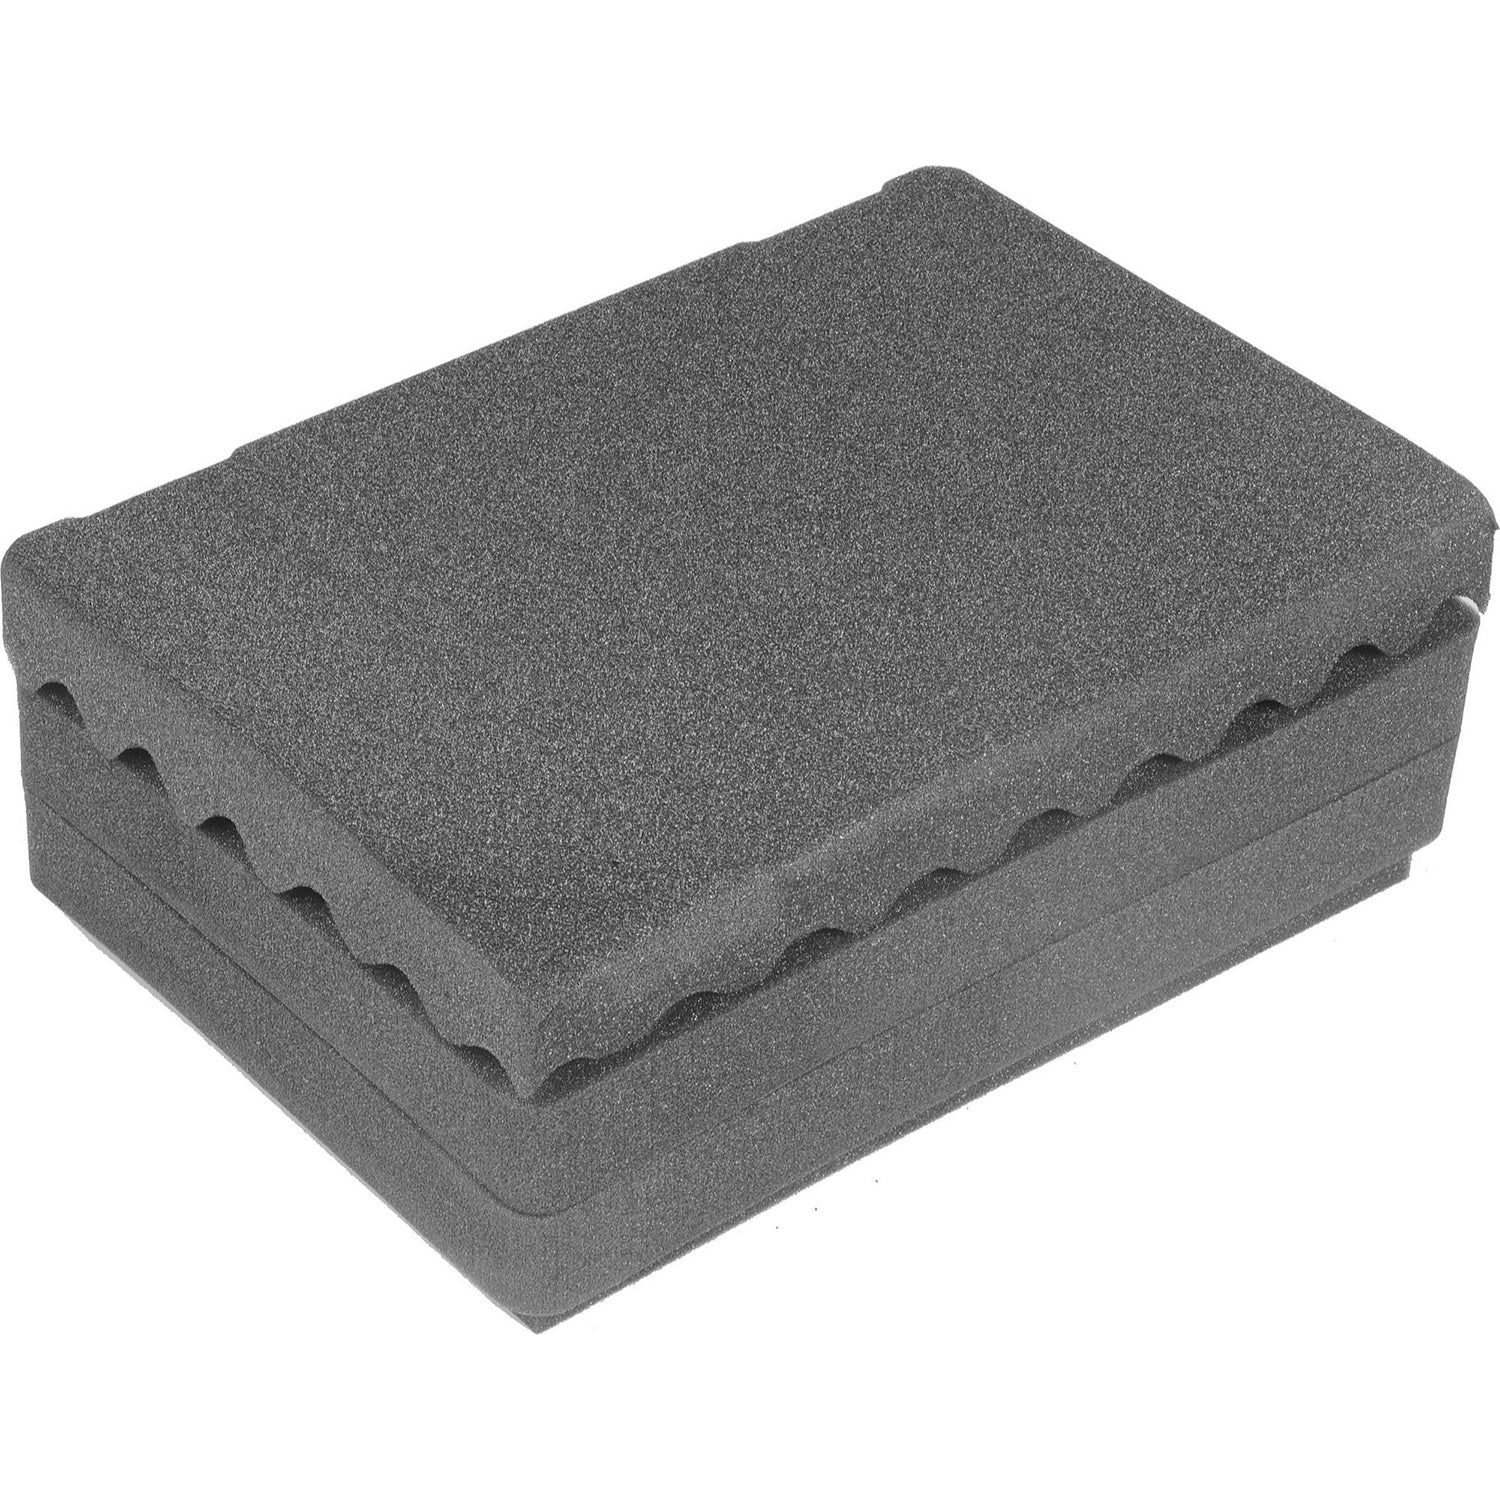 Foam Inserts for Cases – Cases By Source